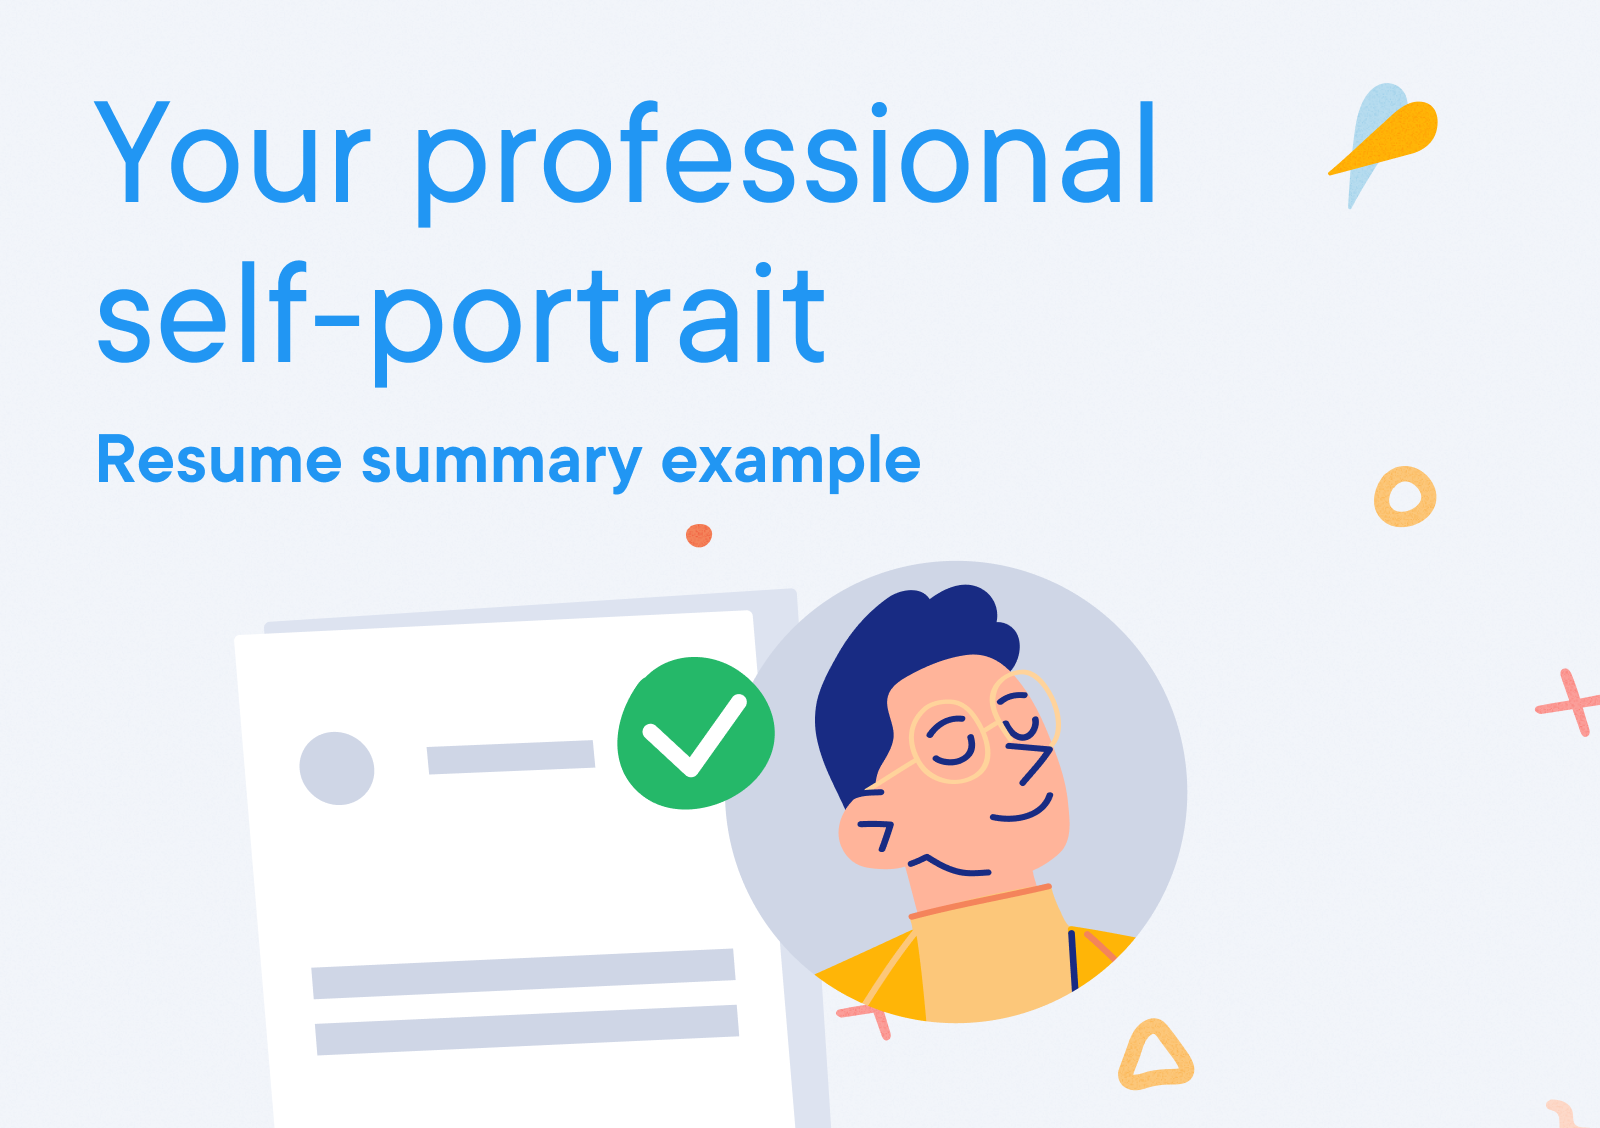 Operations Manager - Your professional self-portrait